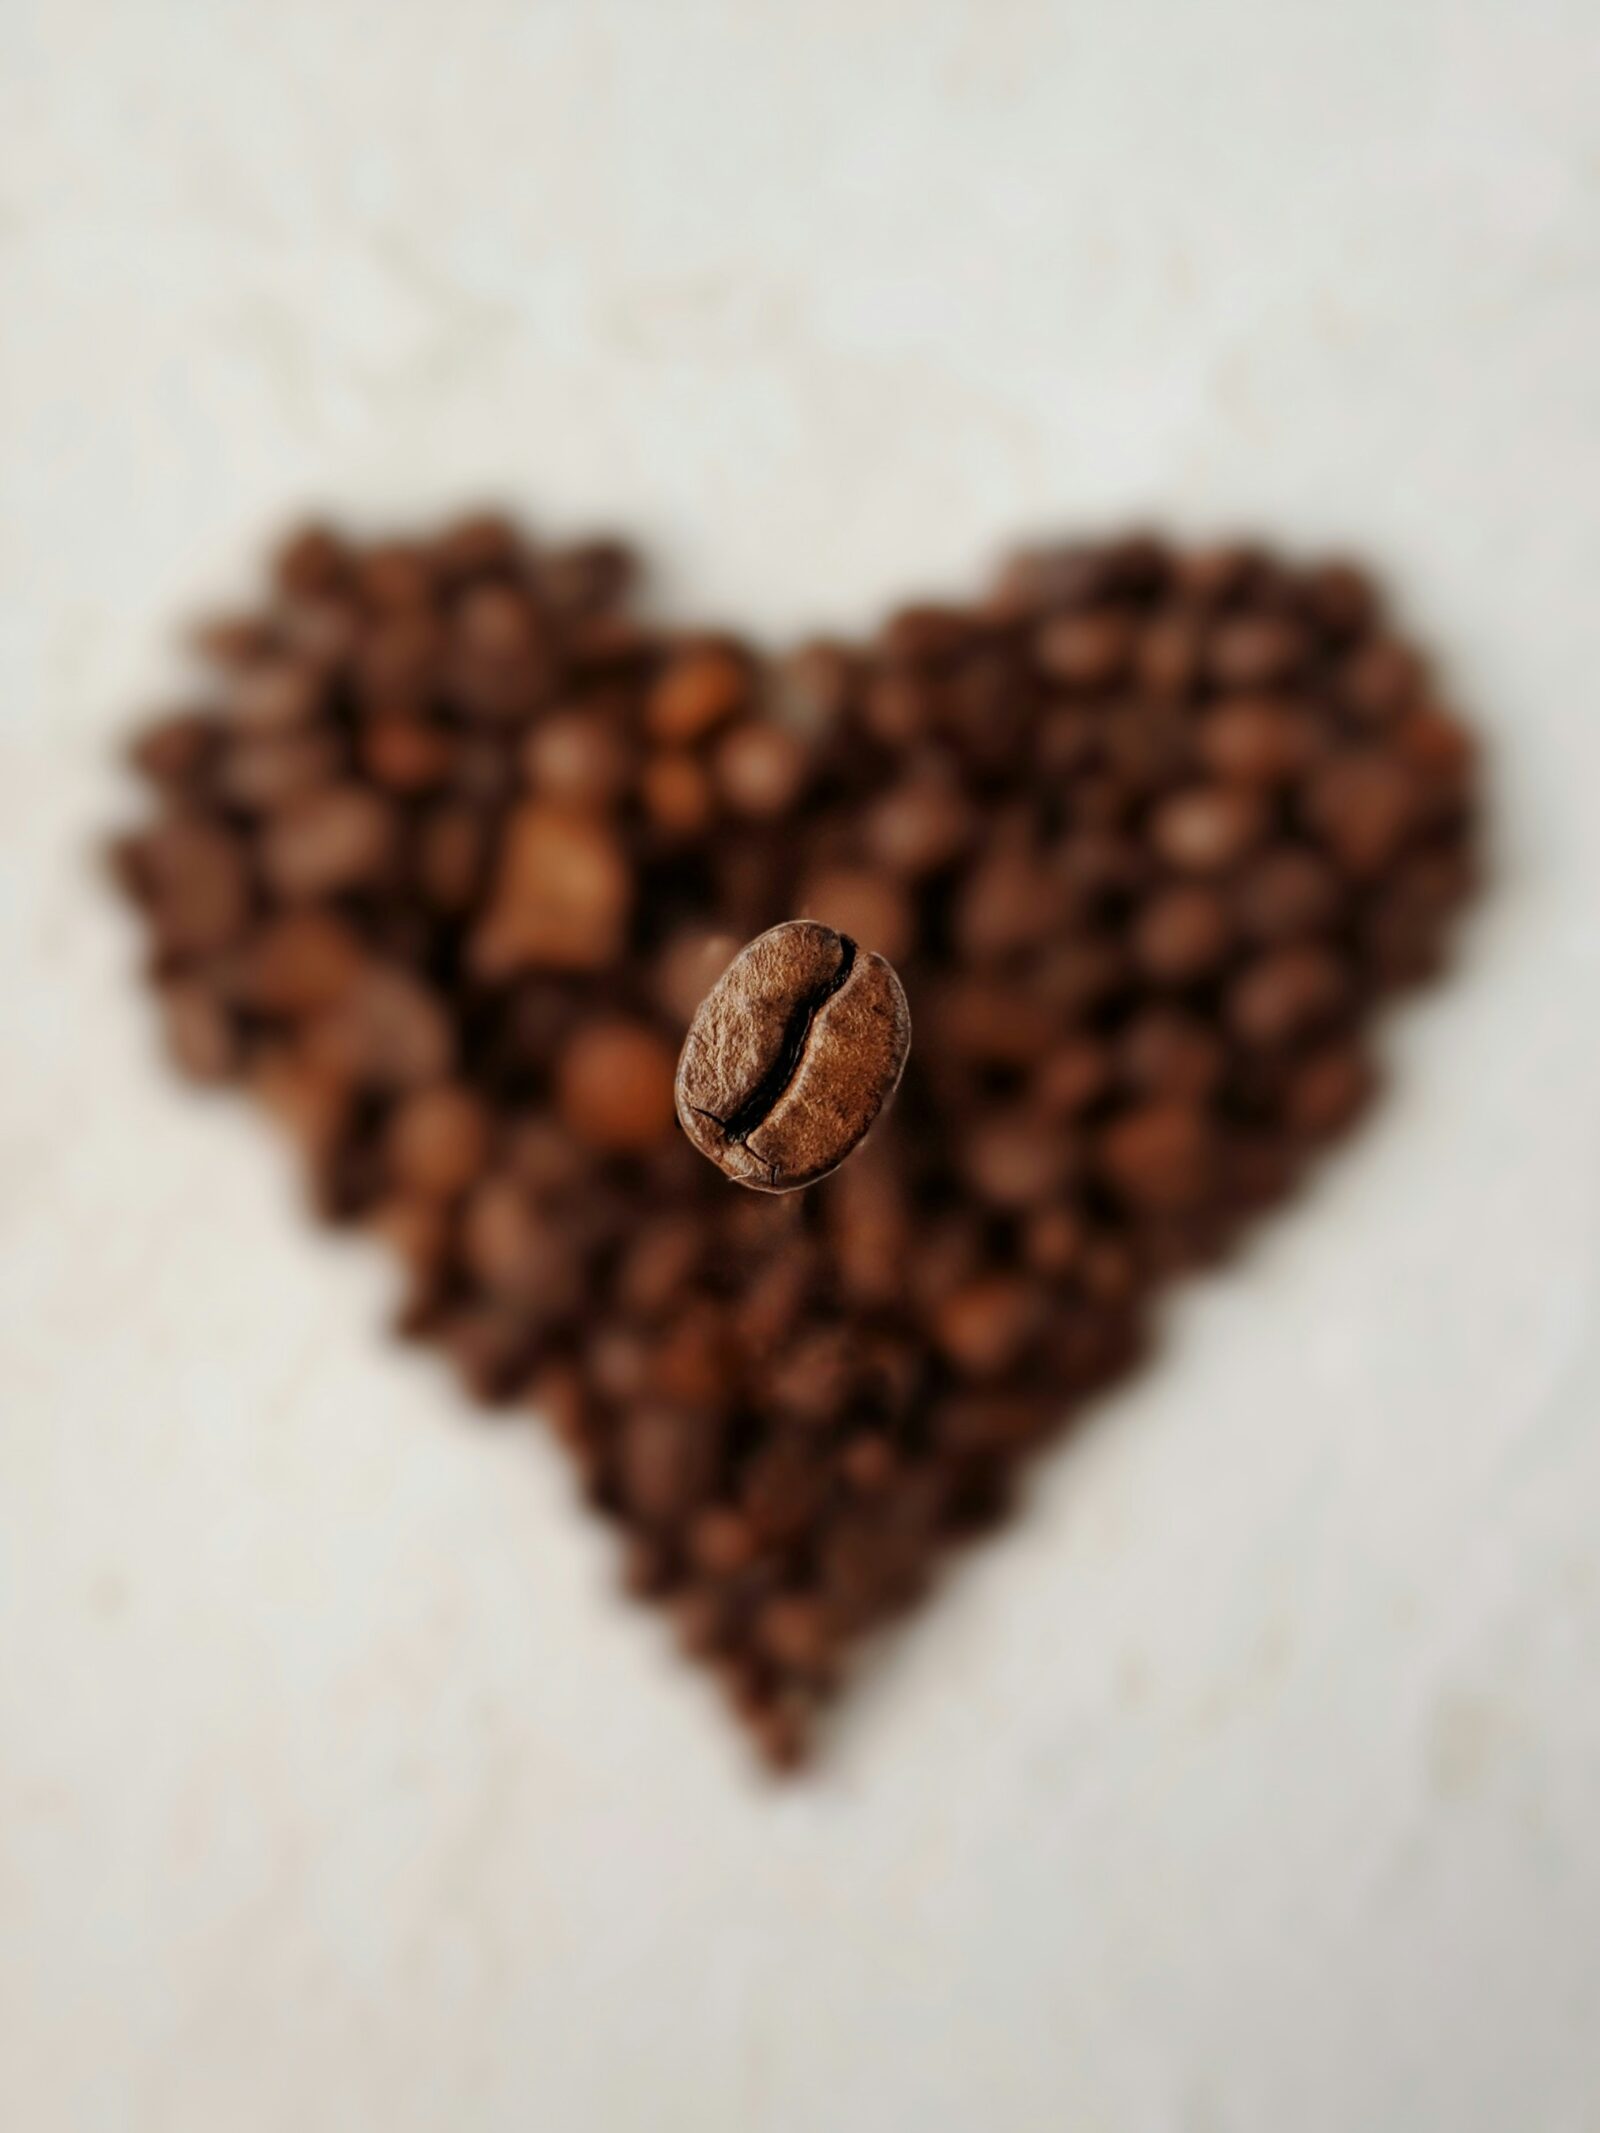 List of Coffee Beans